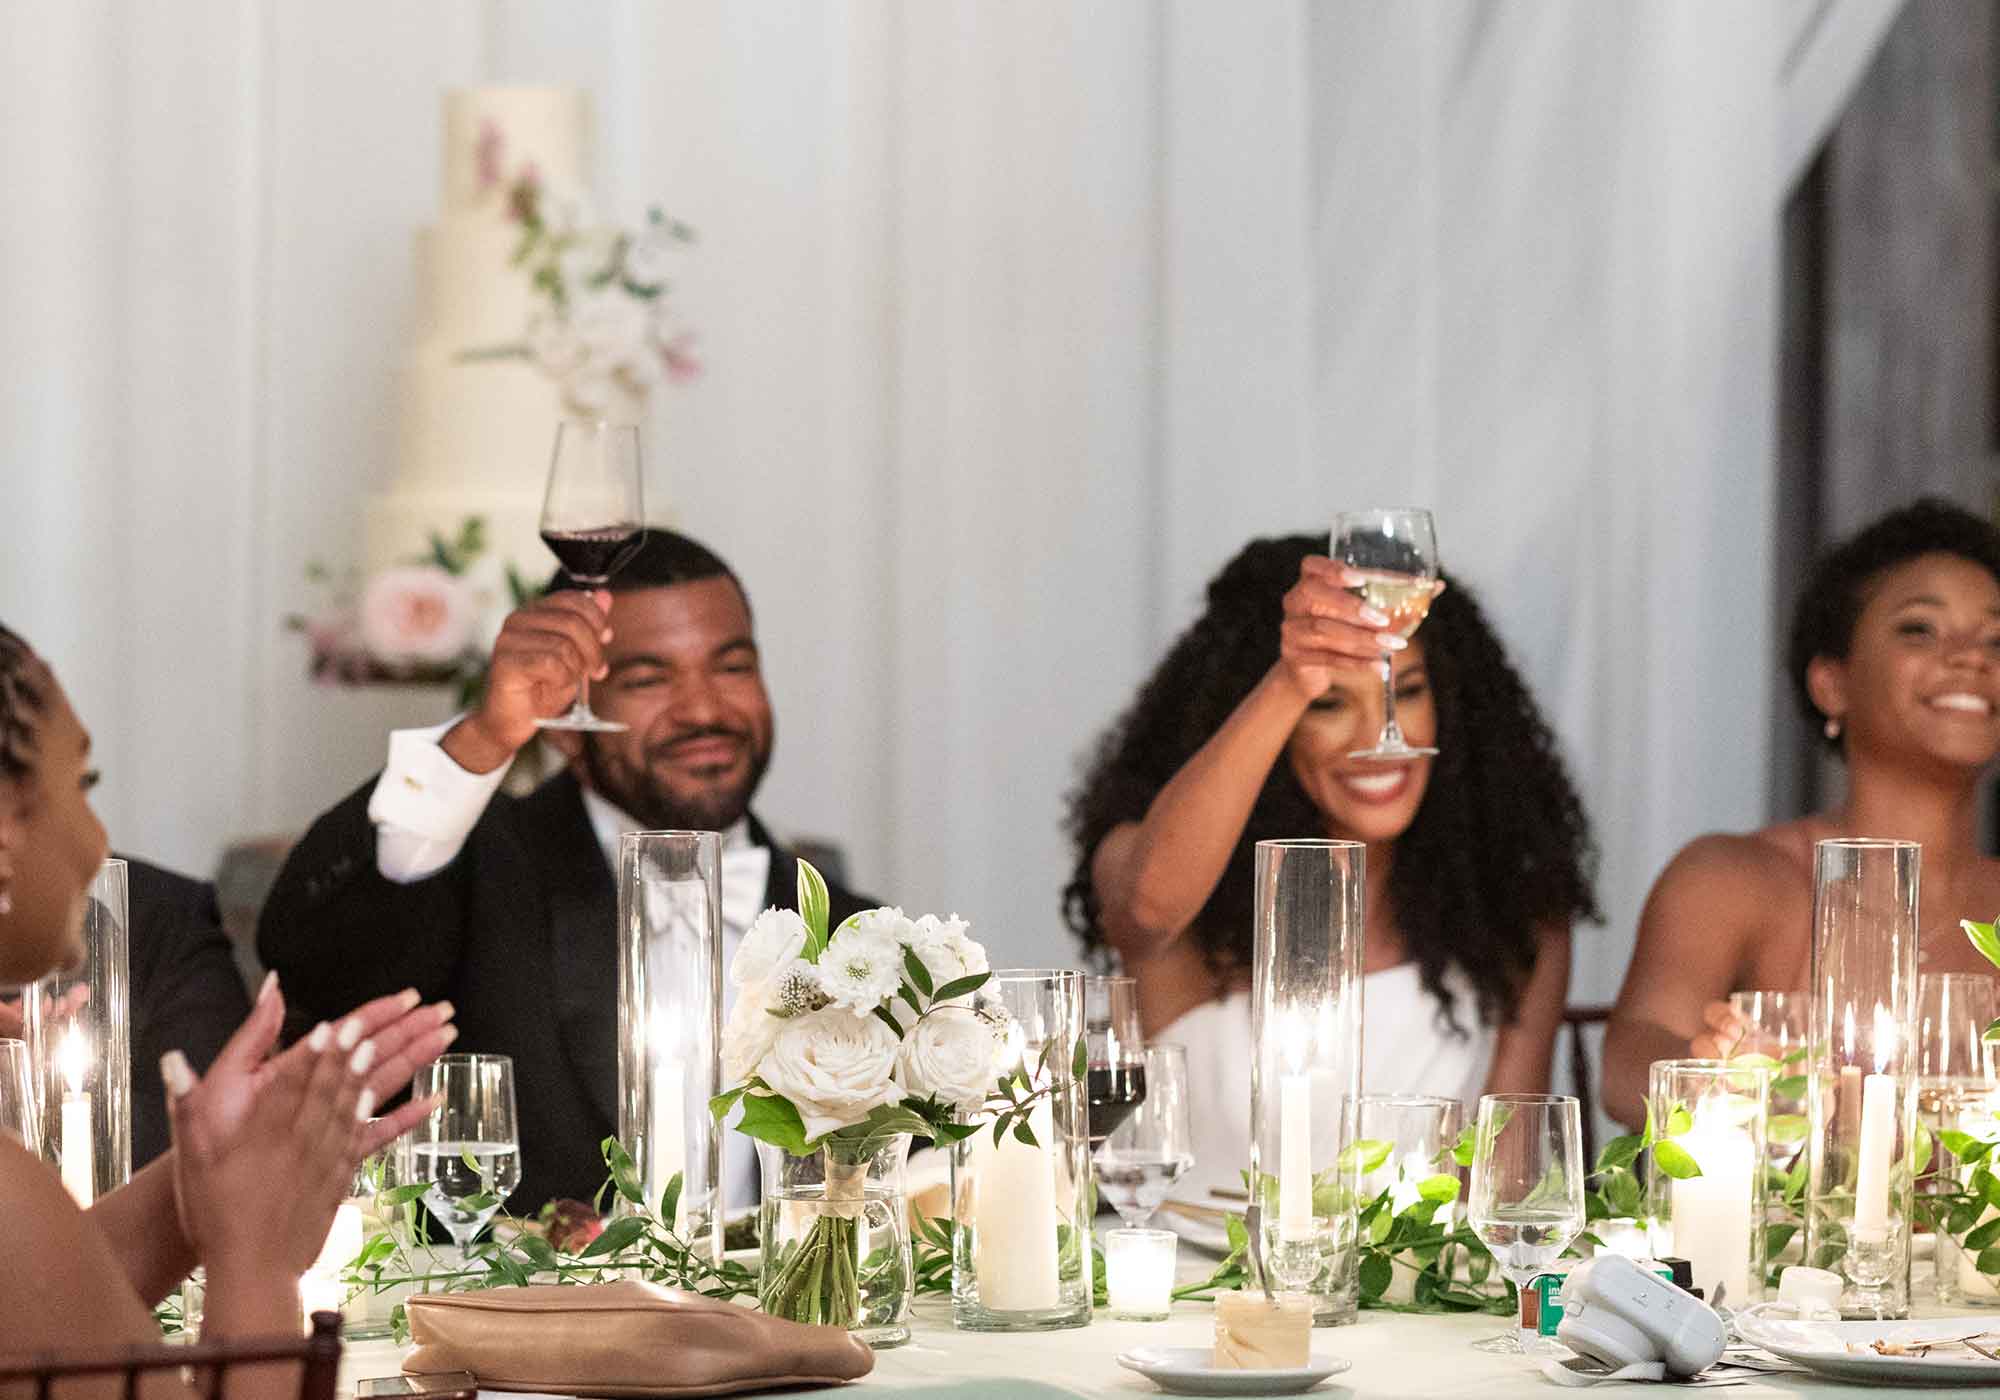 black bride and groom toasting with wine glasses at wedding reception